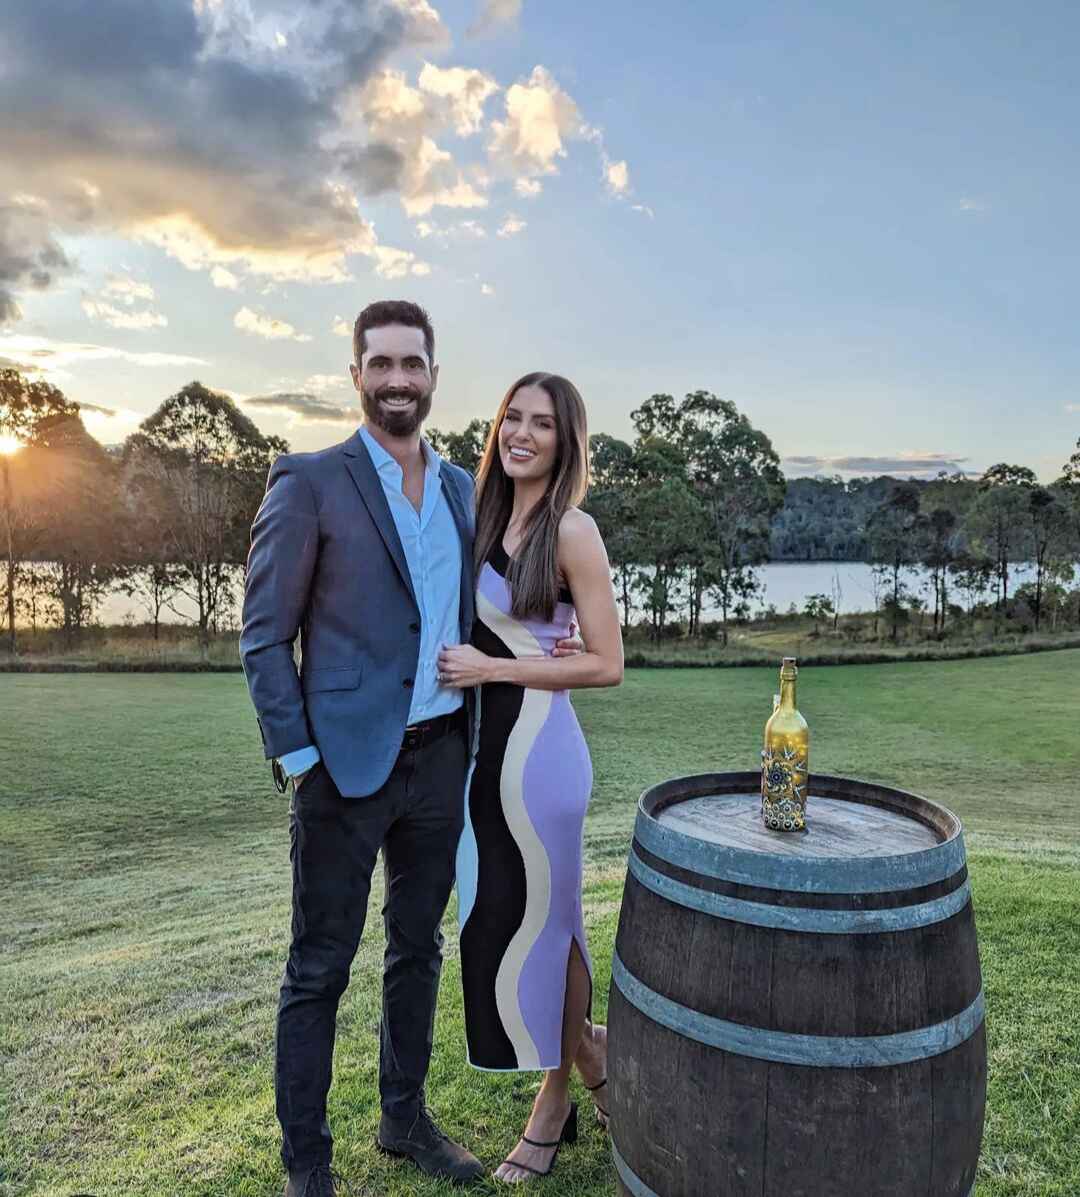 Australian Player's Wives and Girlfriends 2023